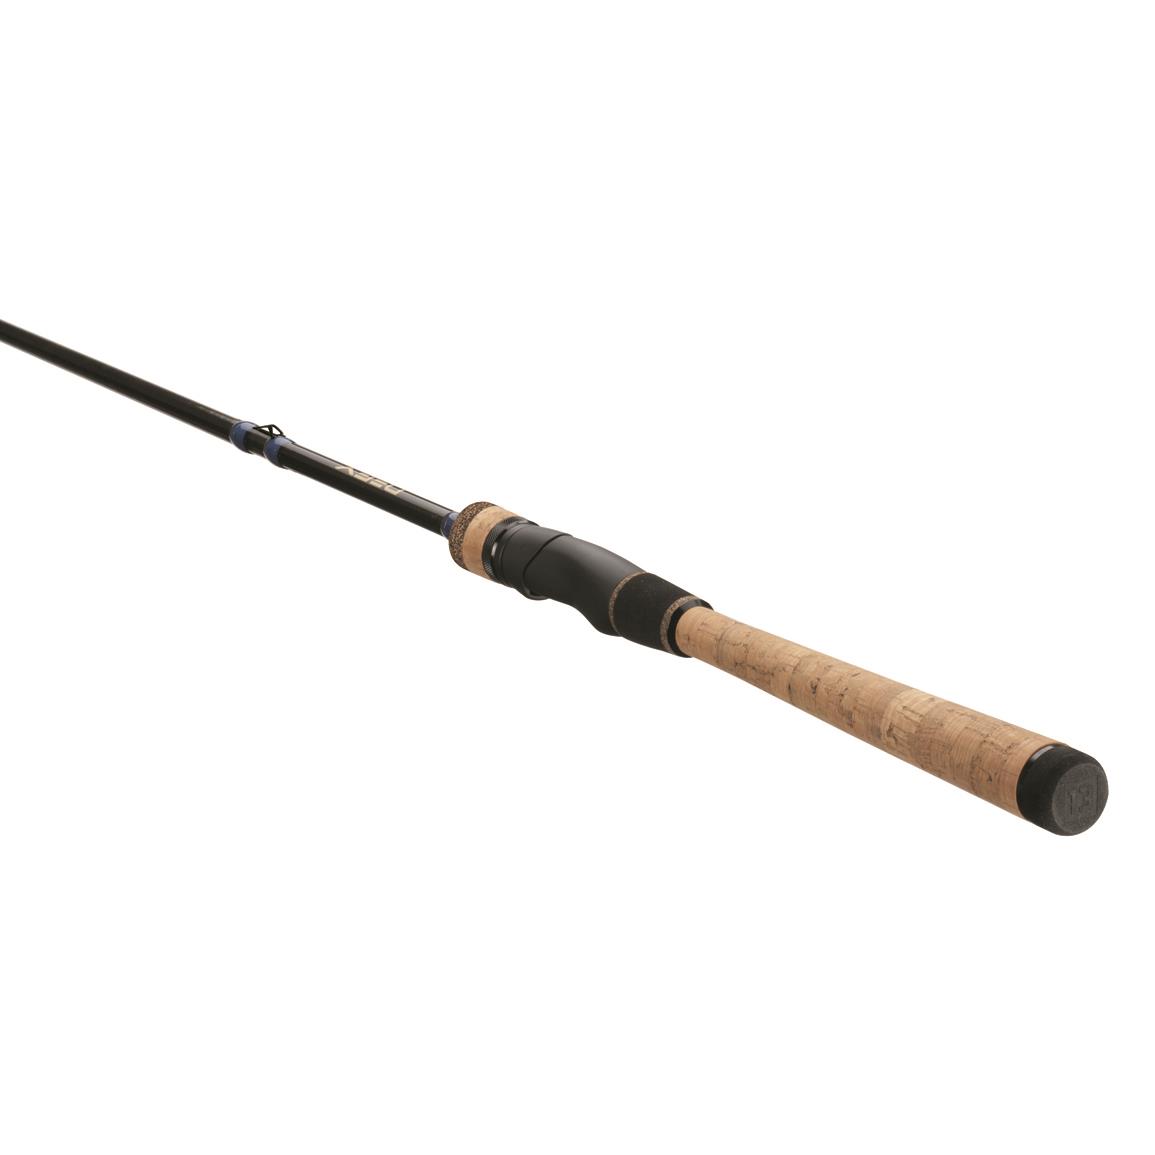 13 Fishing Meta Spinning Rod, 7'2 Length, Medium Heavy Power, Extra Fast  Action - 729854, Spinning Rods at Sportsman's Guide